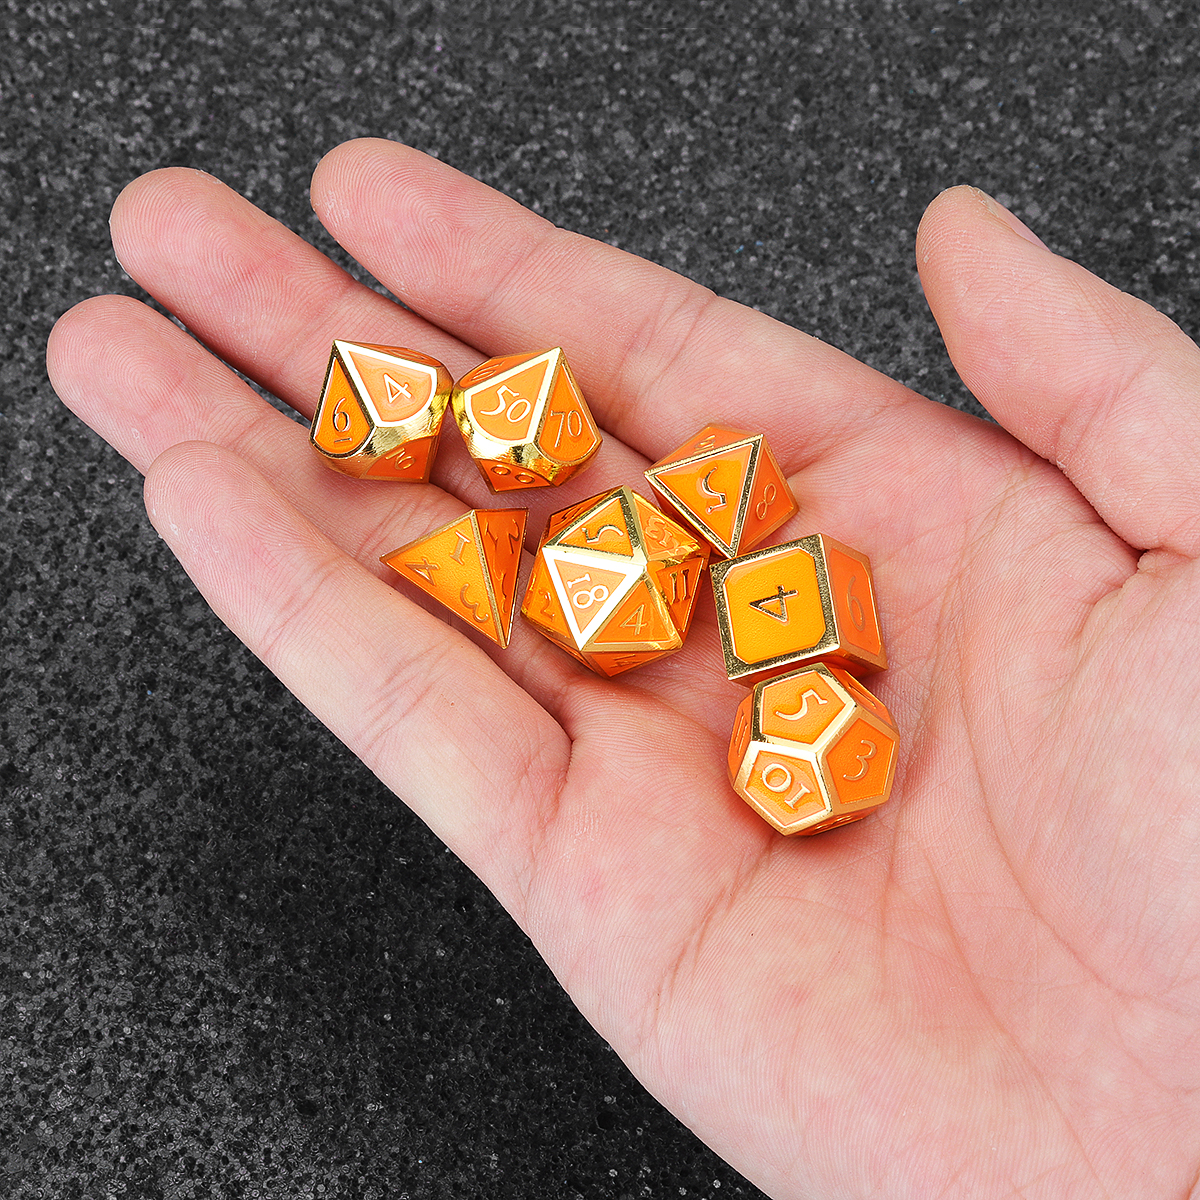 Solid-Metal-Heavy-Dice-Set-Polyhedral-Dices-Role-Playing-Games-Dice-Gadget-RPG-1391317-4